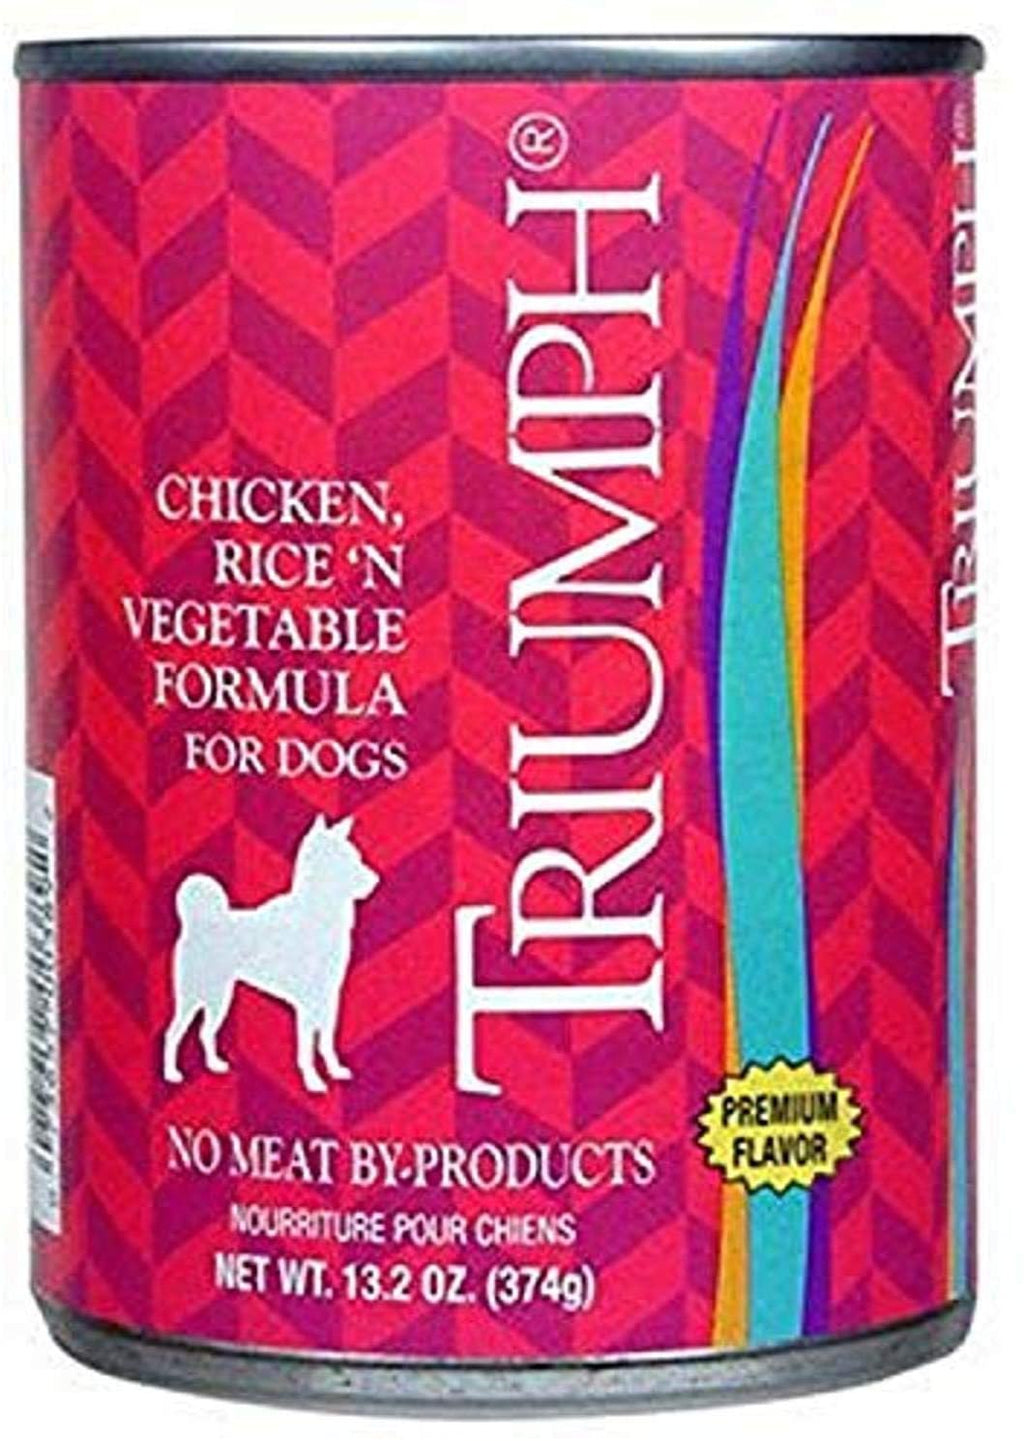 Triumph Chicken-Rice-Veg Puppy and Dog Canned Food - 13.2 oz - Case of 12  